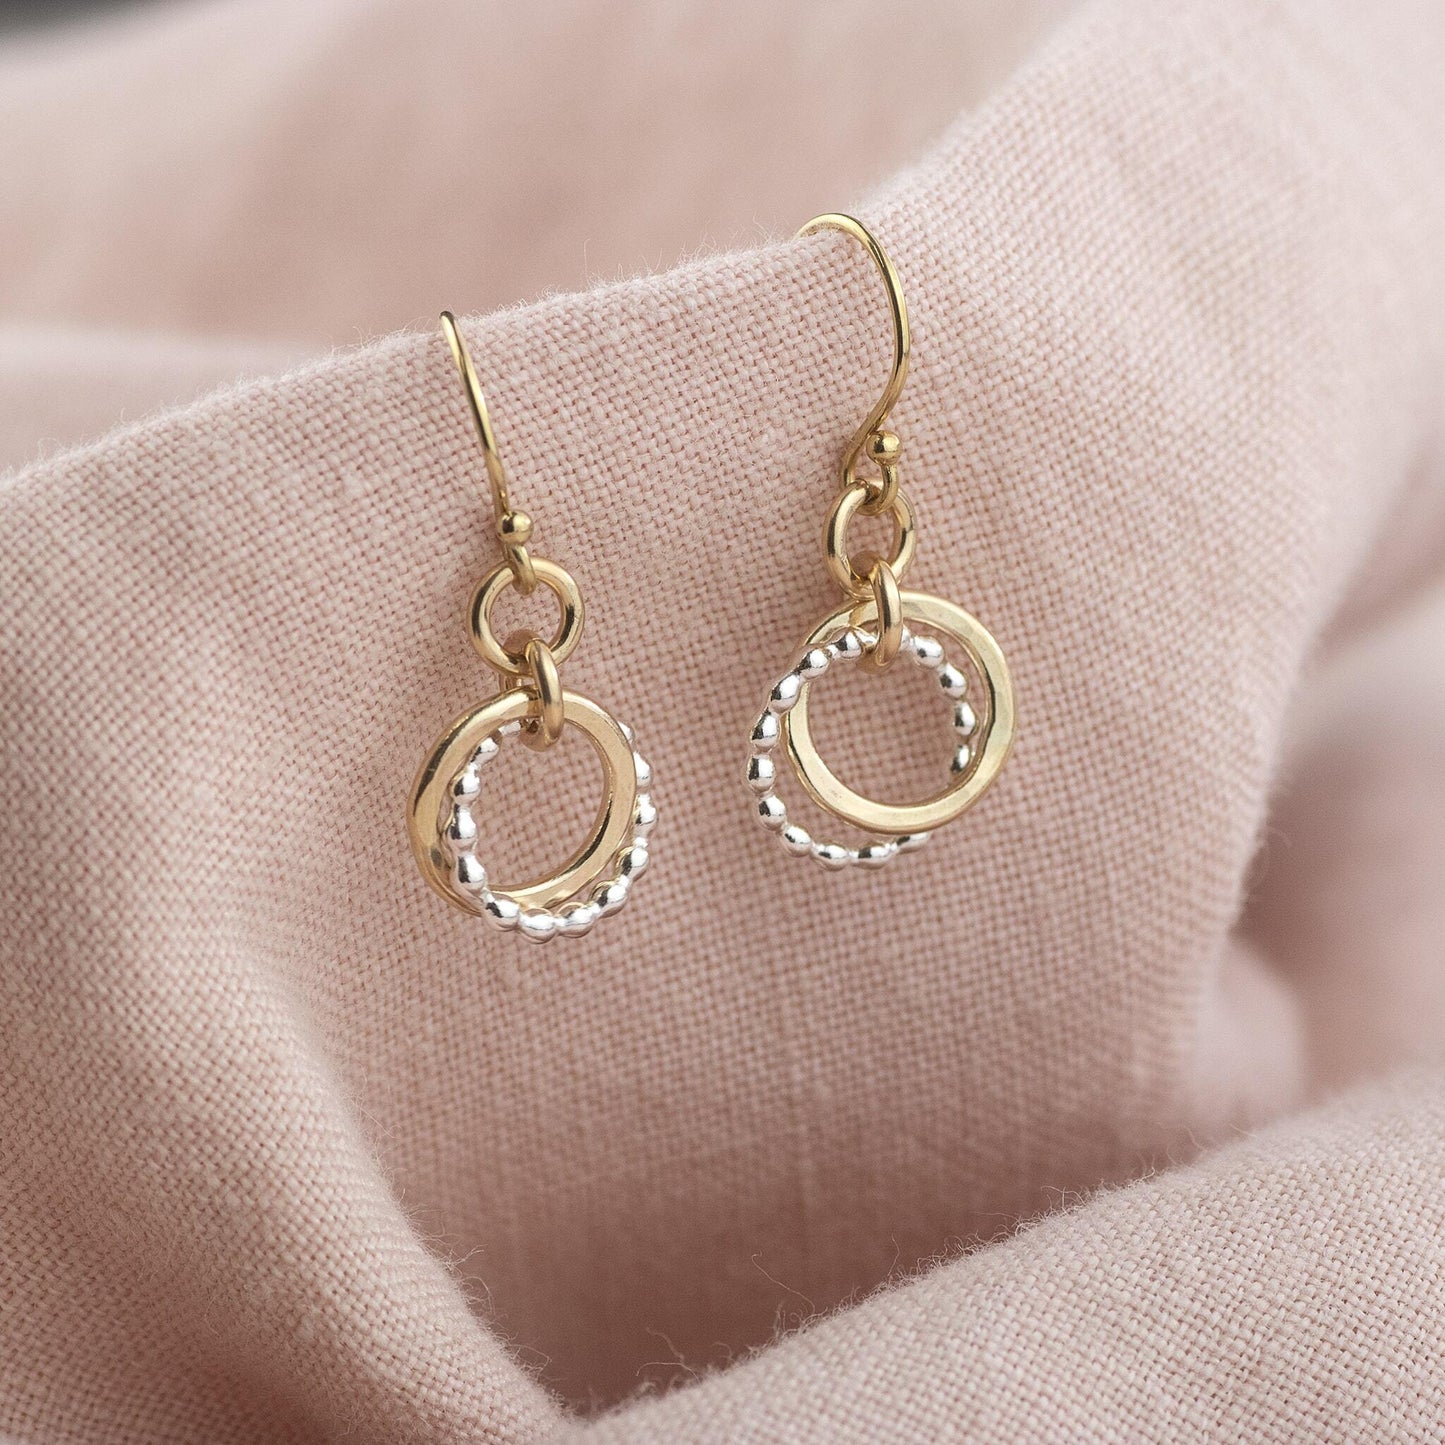 Mother Daughter Gift - Love Knot Earrings - Linked for a Lifetime